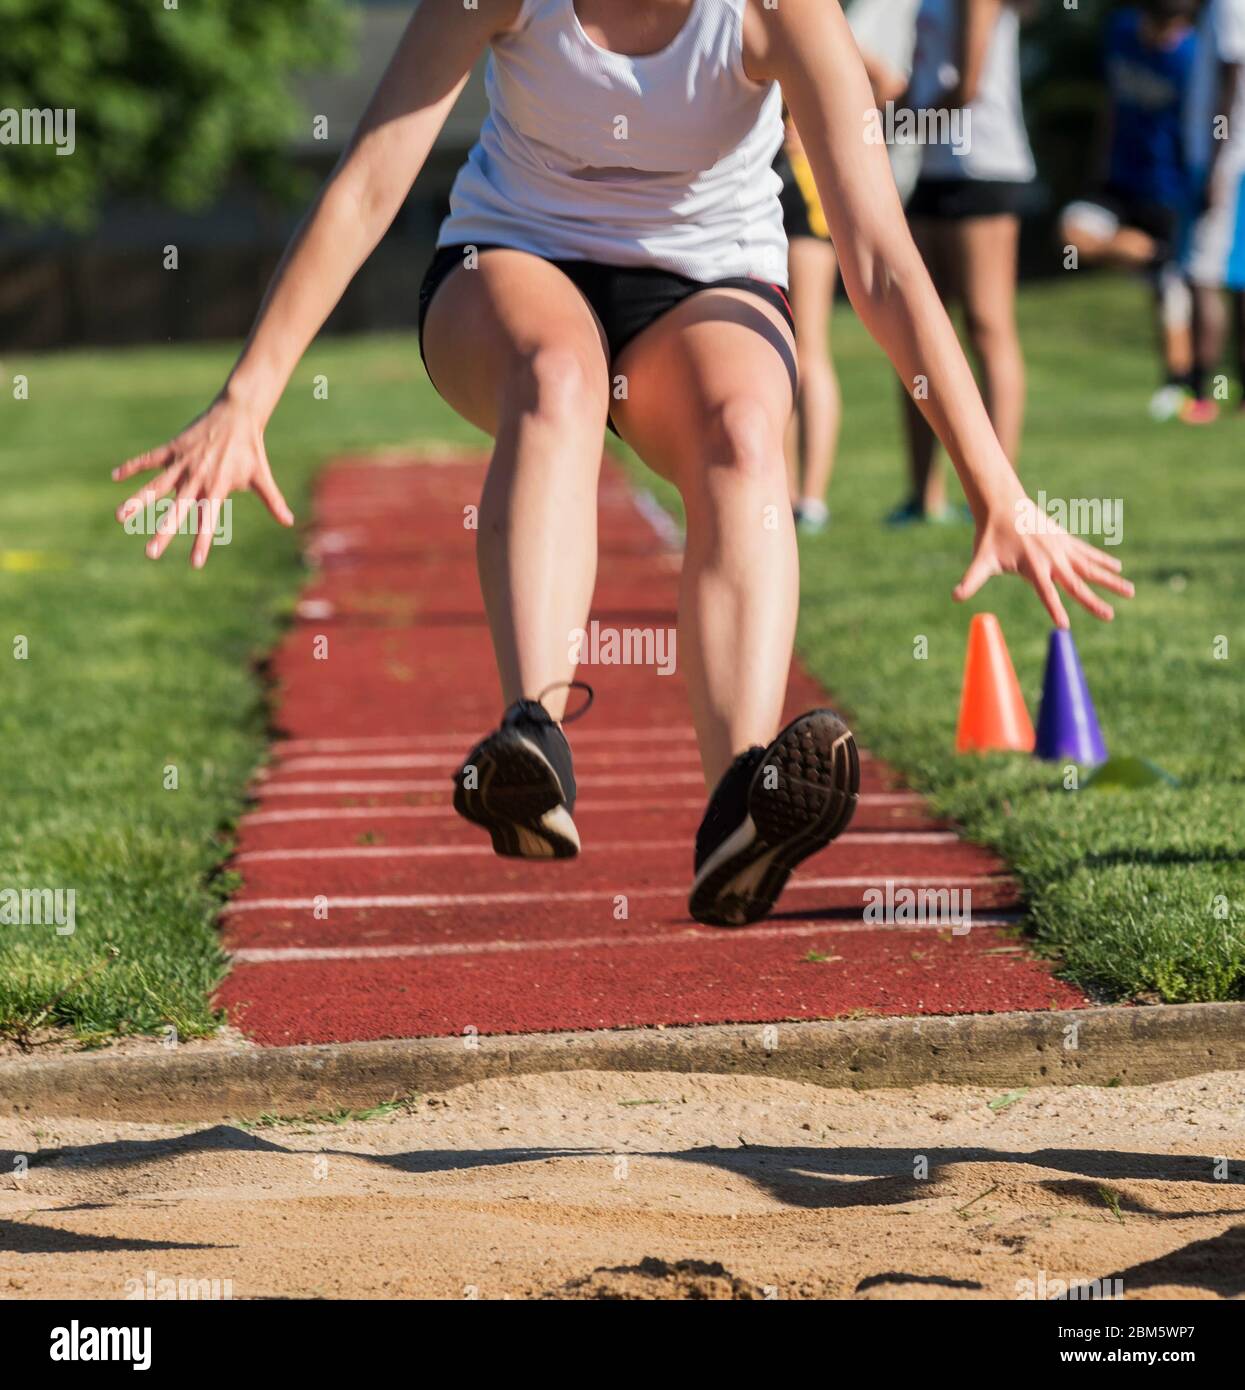 A high school teenage girl is competitin in the triple jump diring a track and field competition and is landing into the sane pit. Stock Photo